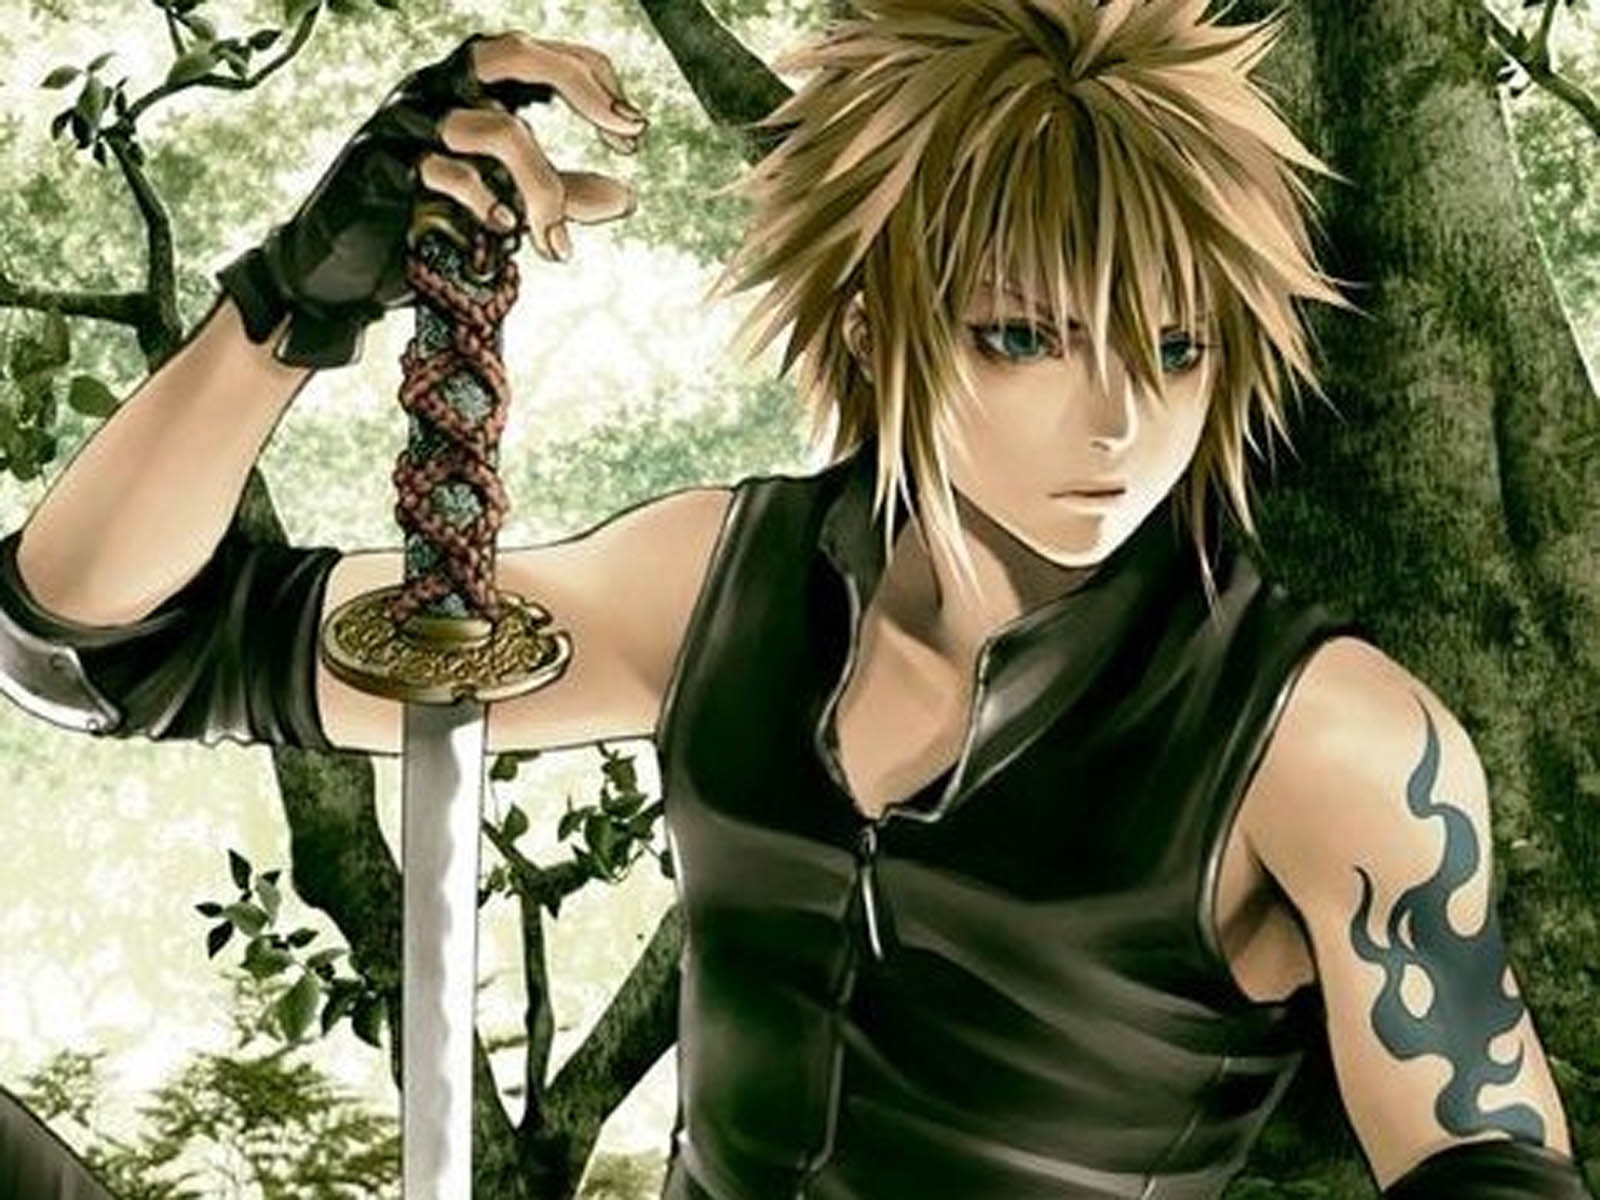 HD Wallpapers: Anime Guy Cool Wallpapers